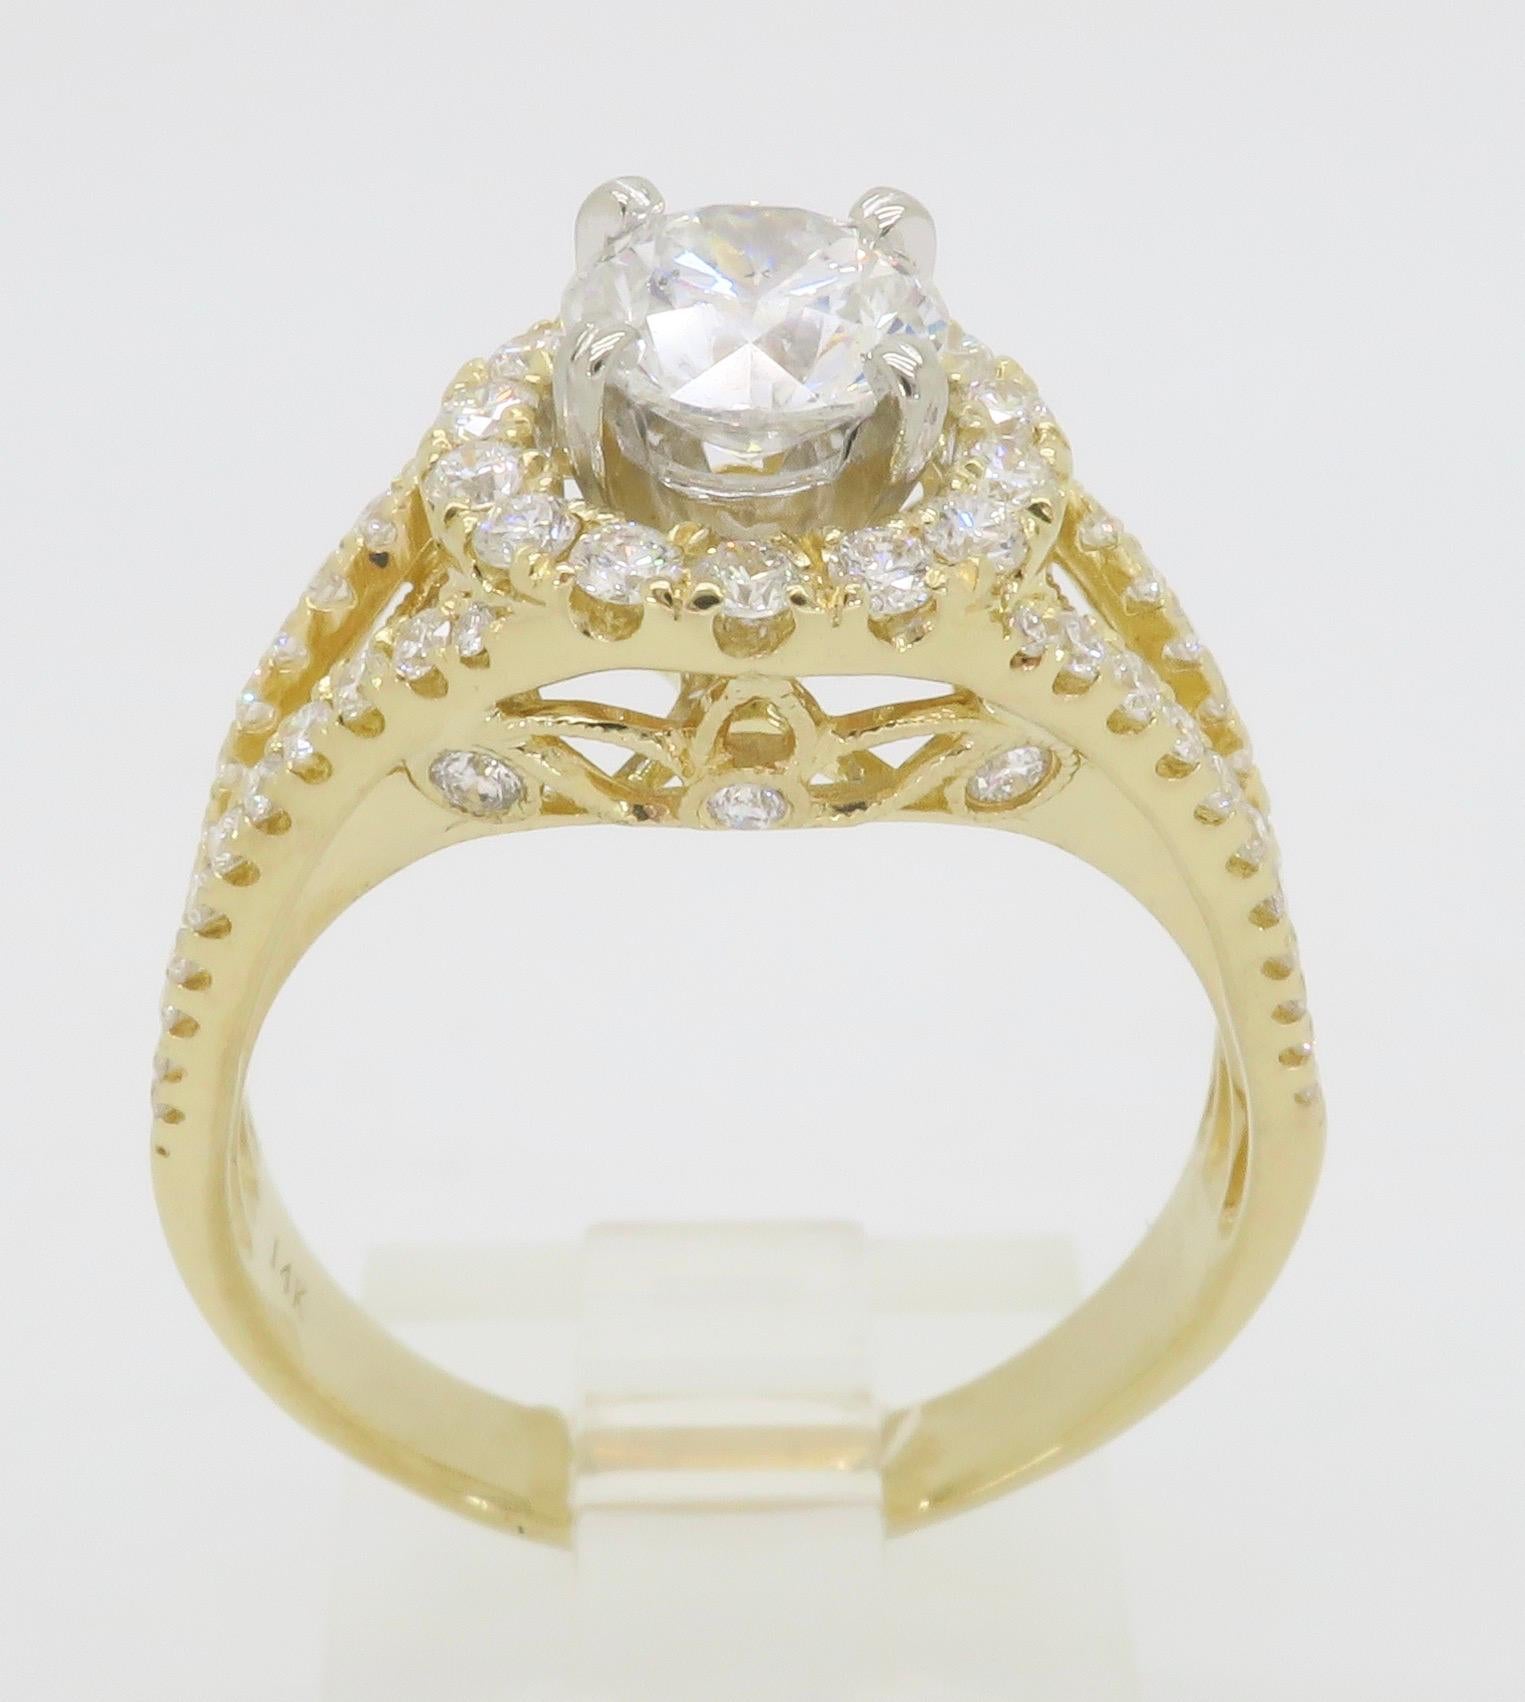 2.04CTW Diamond Engagement Ring in 14k Yellow Gold For Sale 11